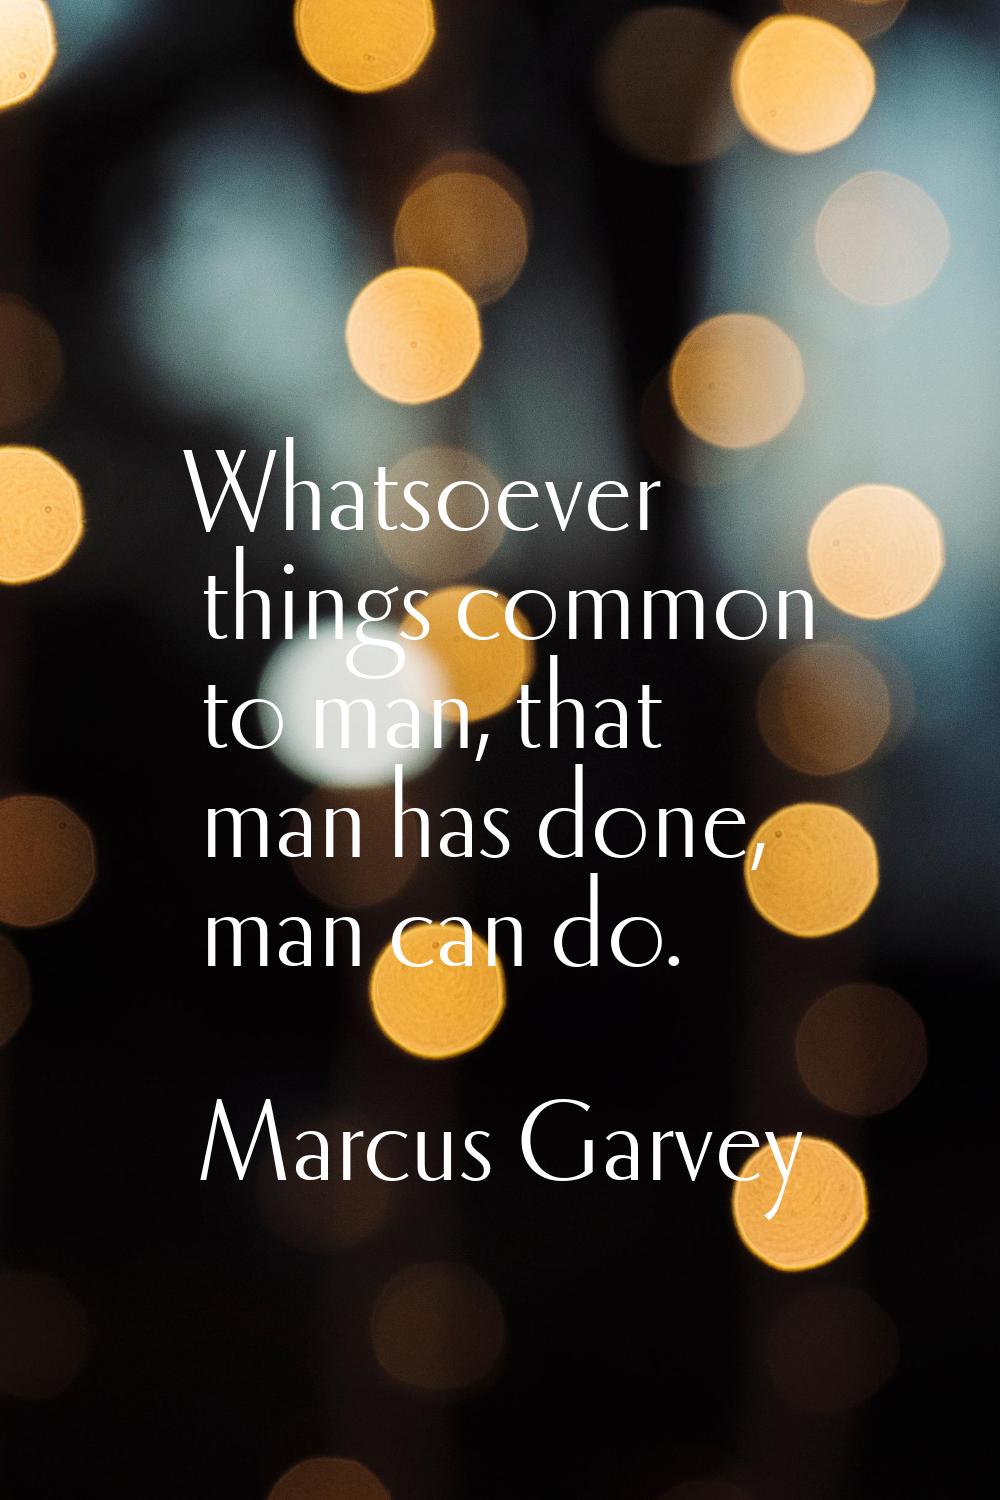 Whatsoever things common to man, that man has done, man can do.